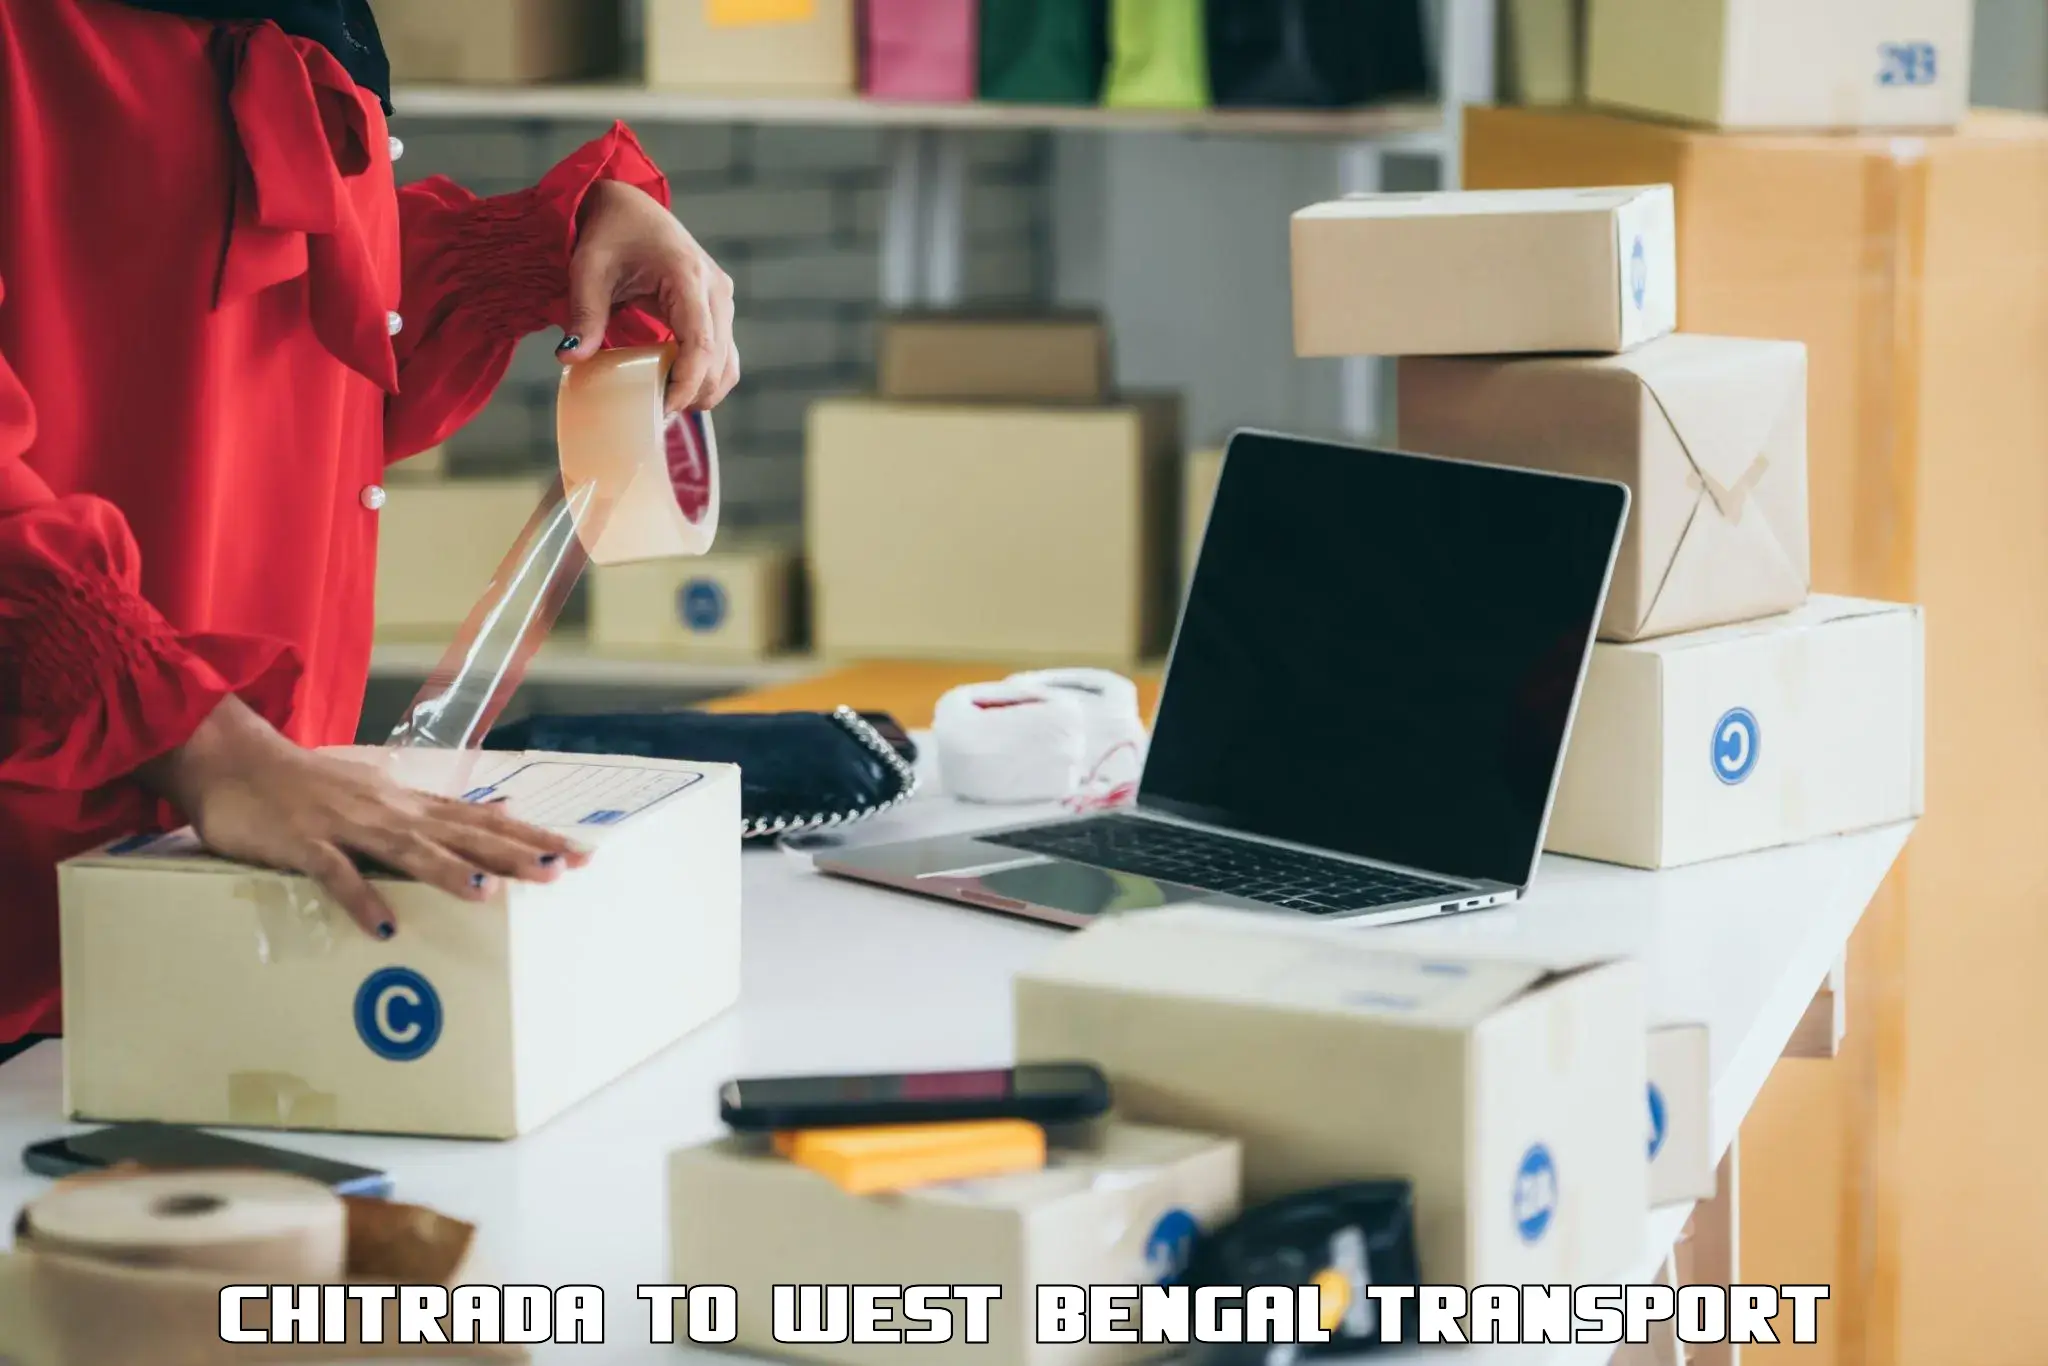 Online transport service Chitrada to West Bengal